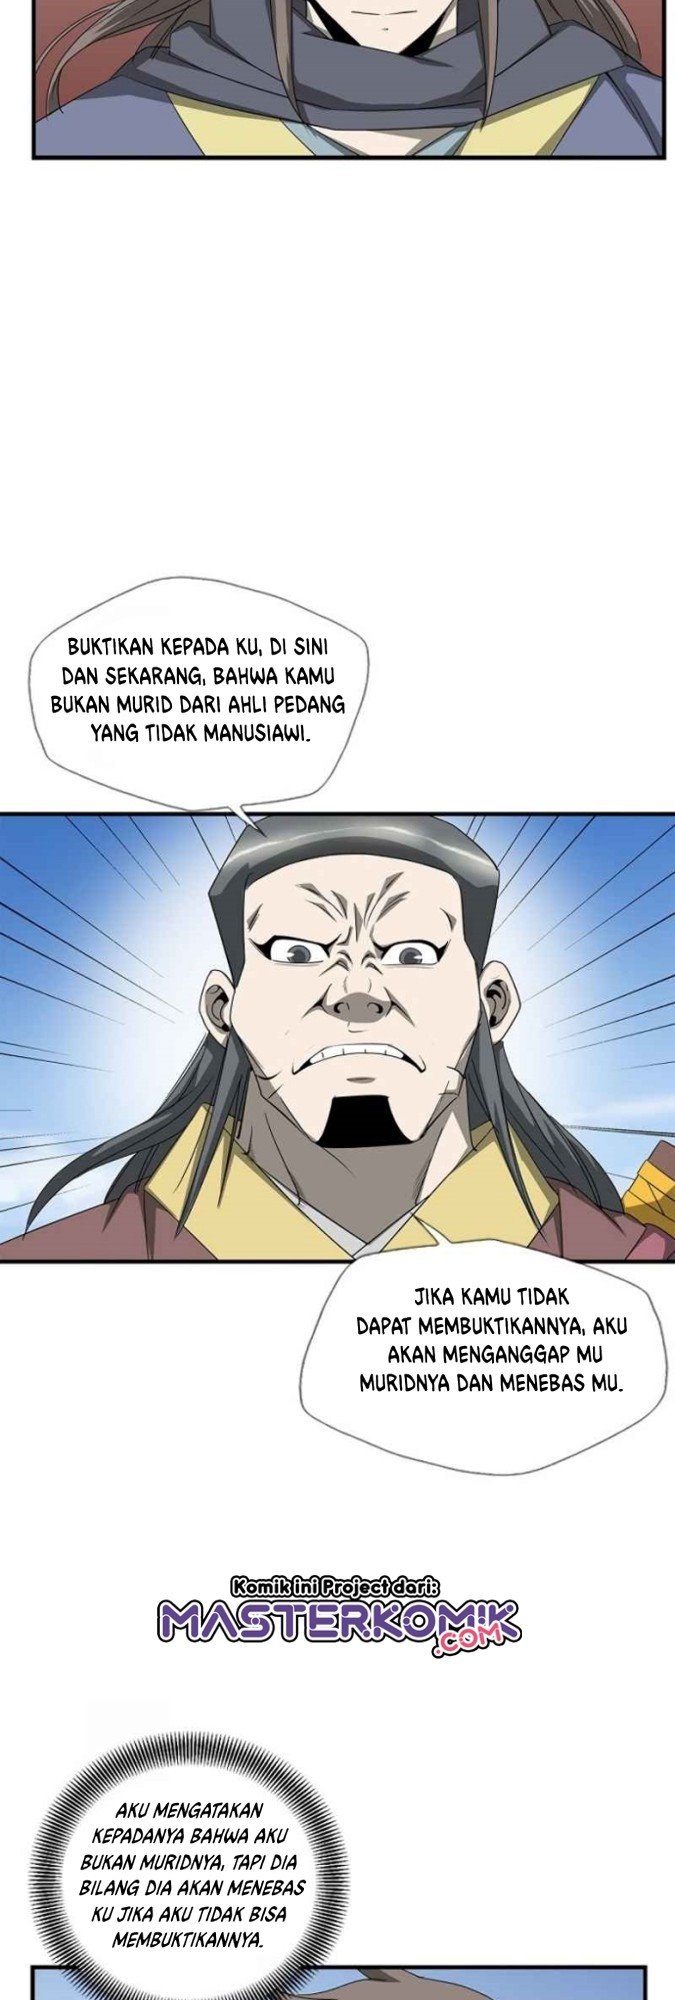 Strong Gale, Mad Dragon Chapter 42